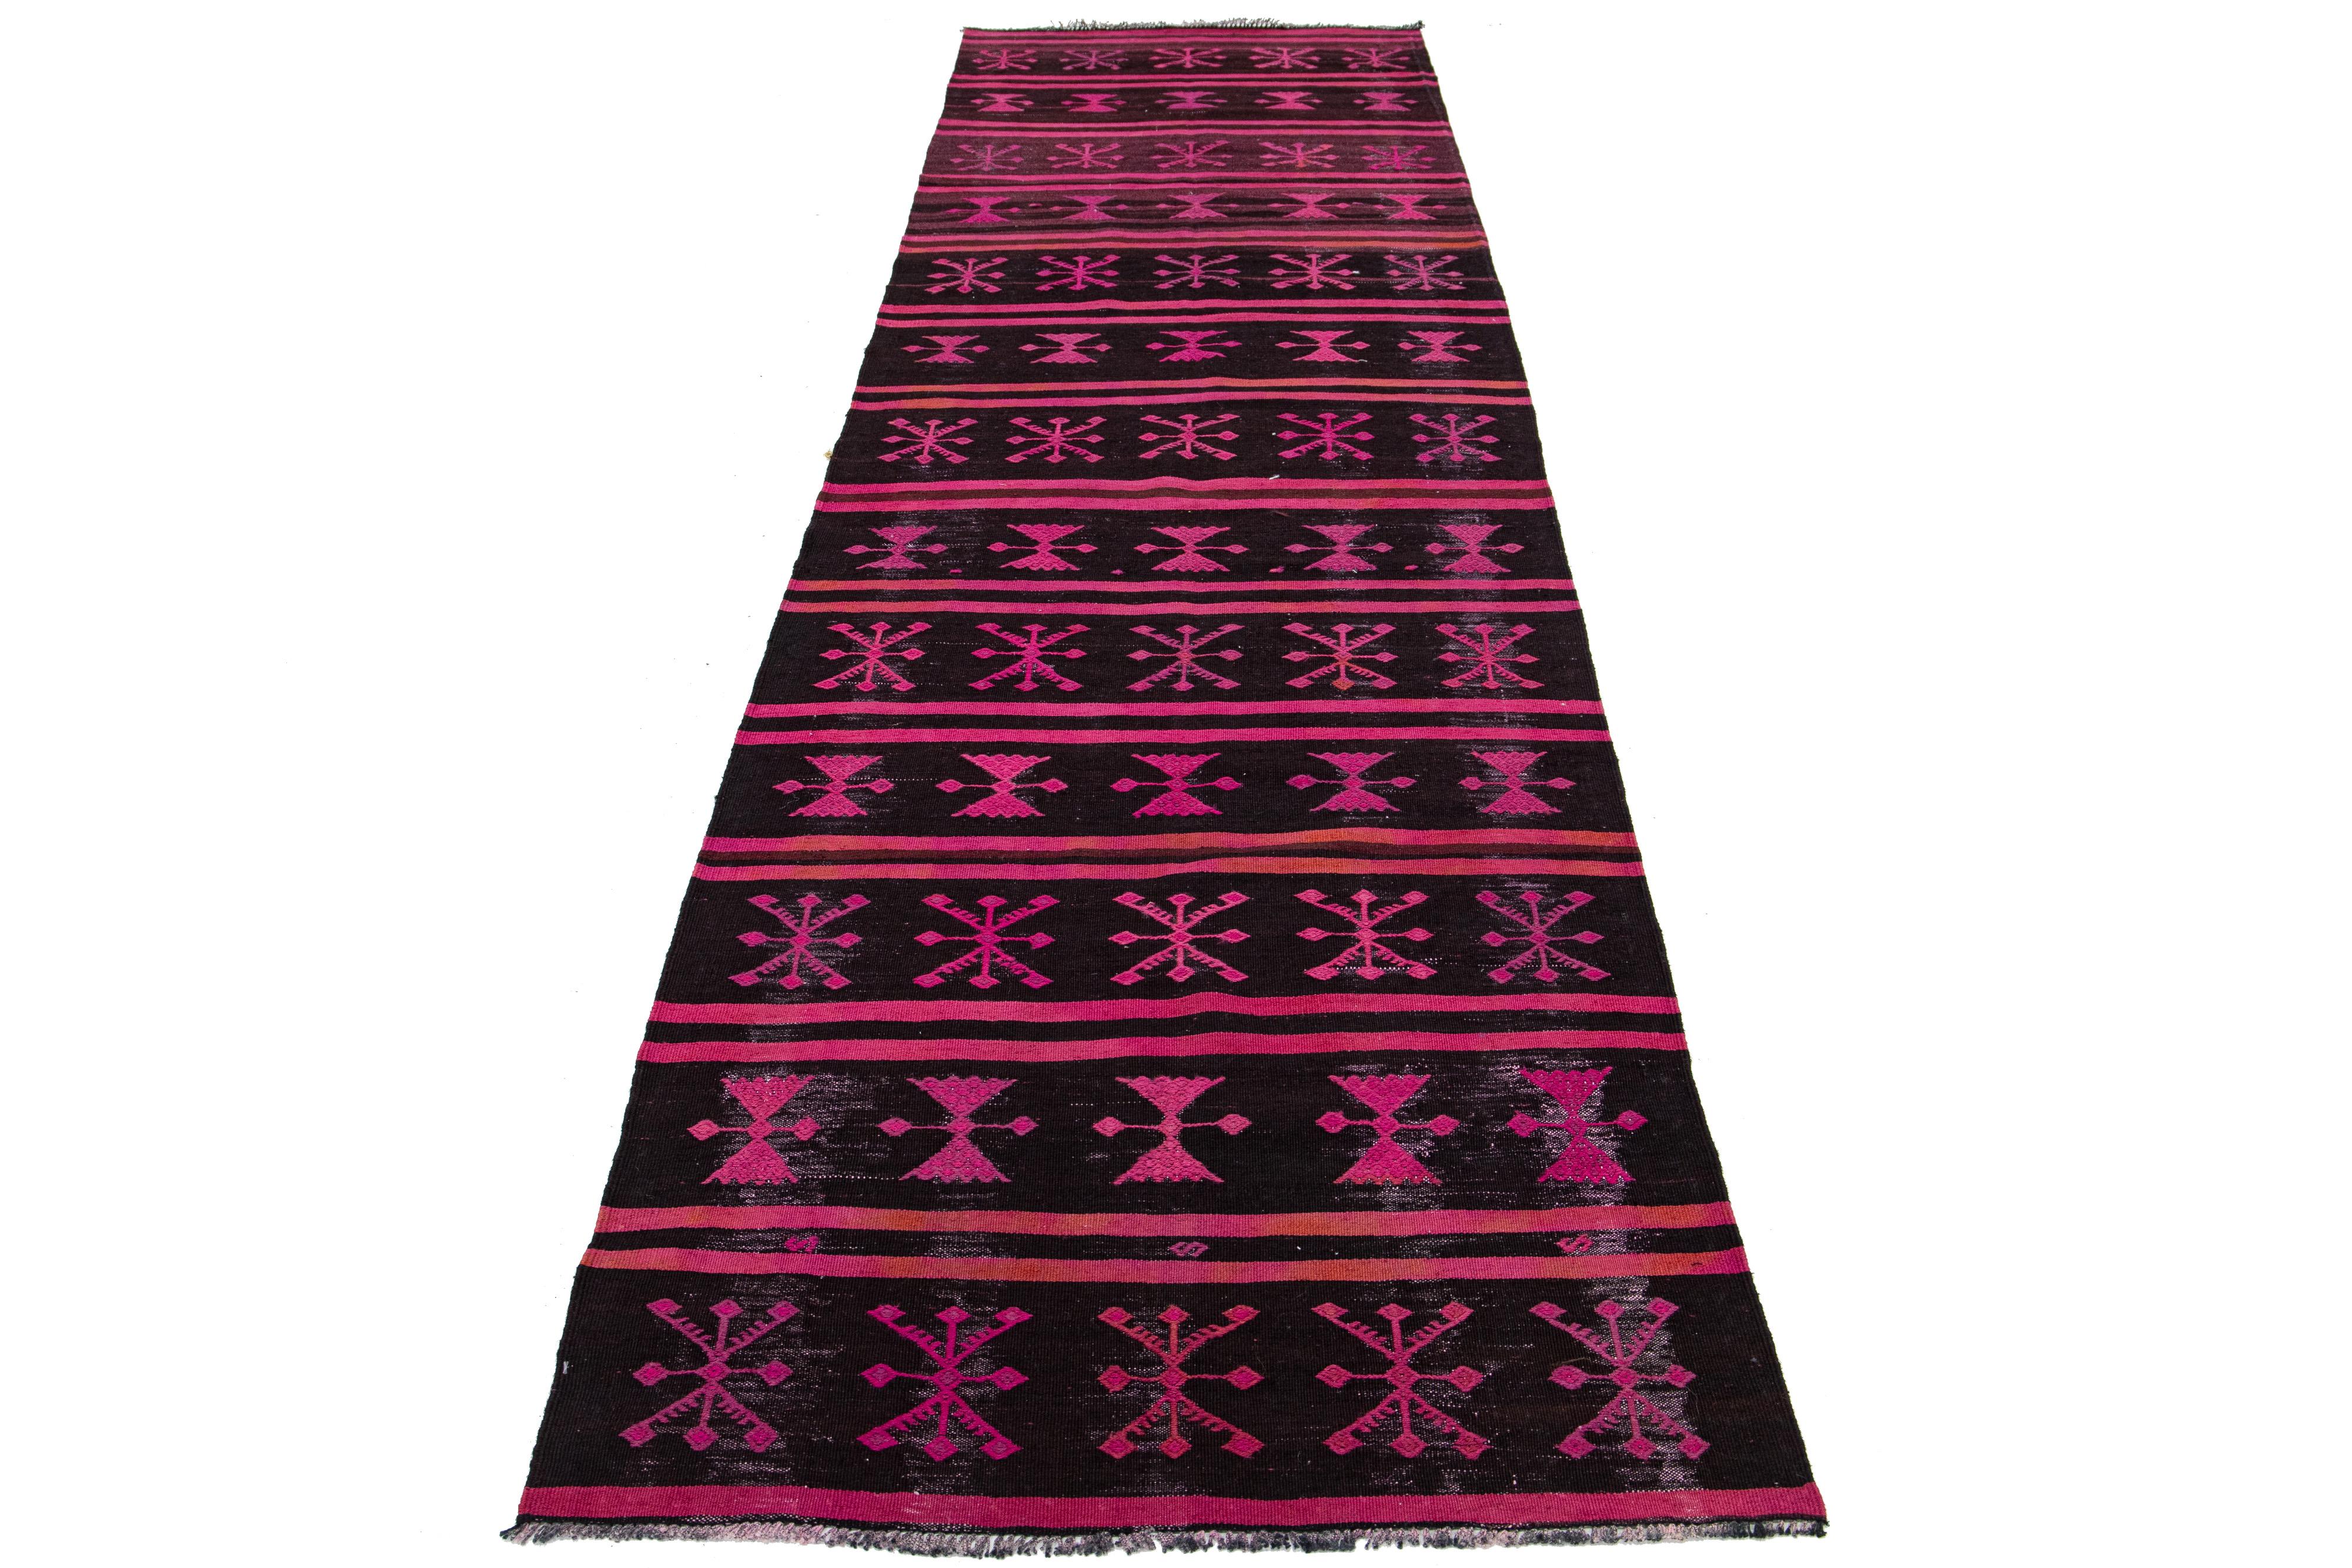 This is a handmade wool flatweave kilim rug with a dark brown field. The rug boasts an all-over geometric design in pink that adds to its aesthetic appeal.

This rug measures 3' x 11'.

Our rugs are professionally cleaned before shipping.